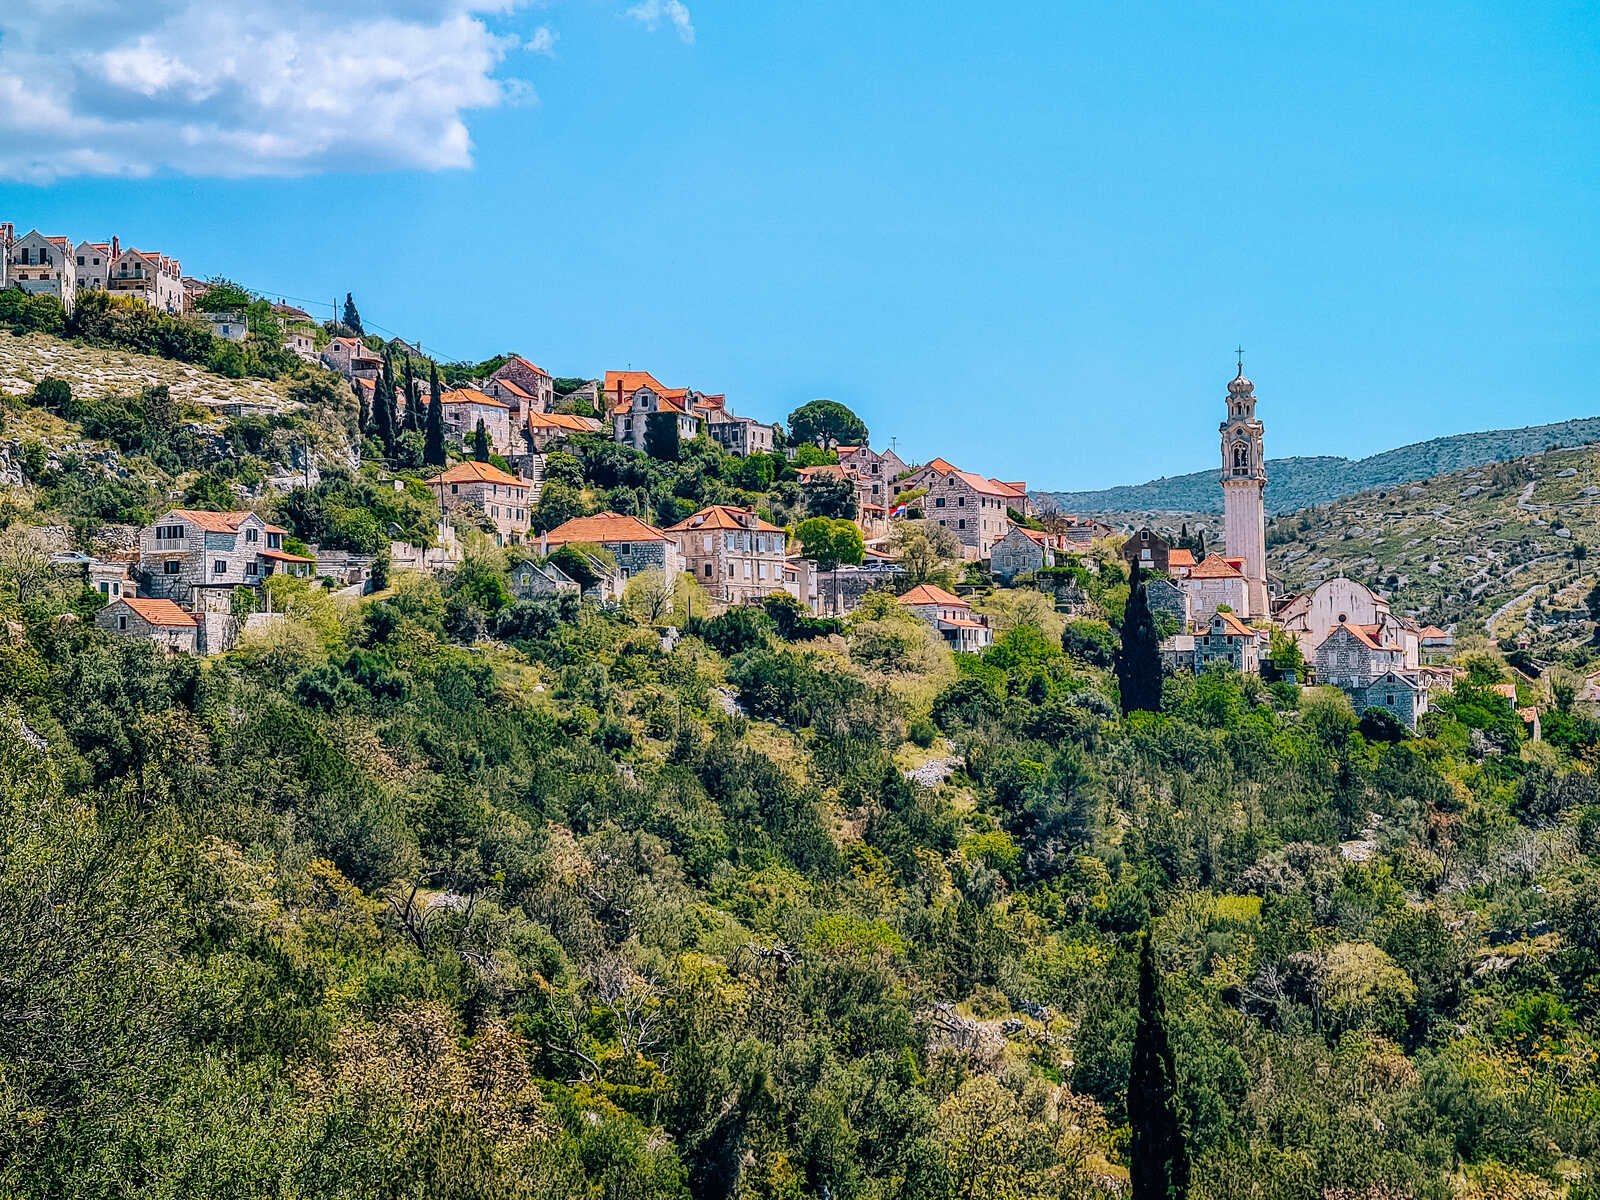 A small village on a hillside, surrounded by lush green trees, the tops of buildings with orange rooftops can be seen an a church tower protruding above